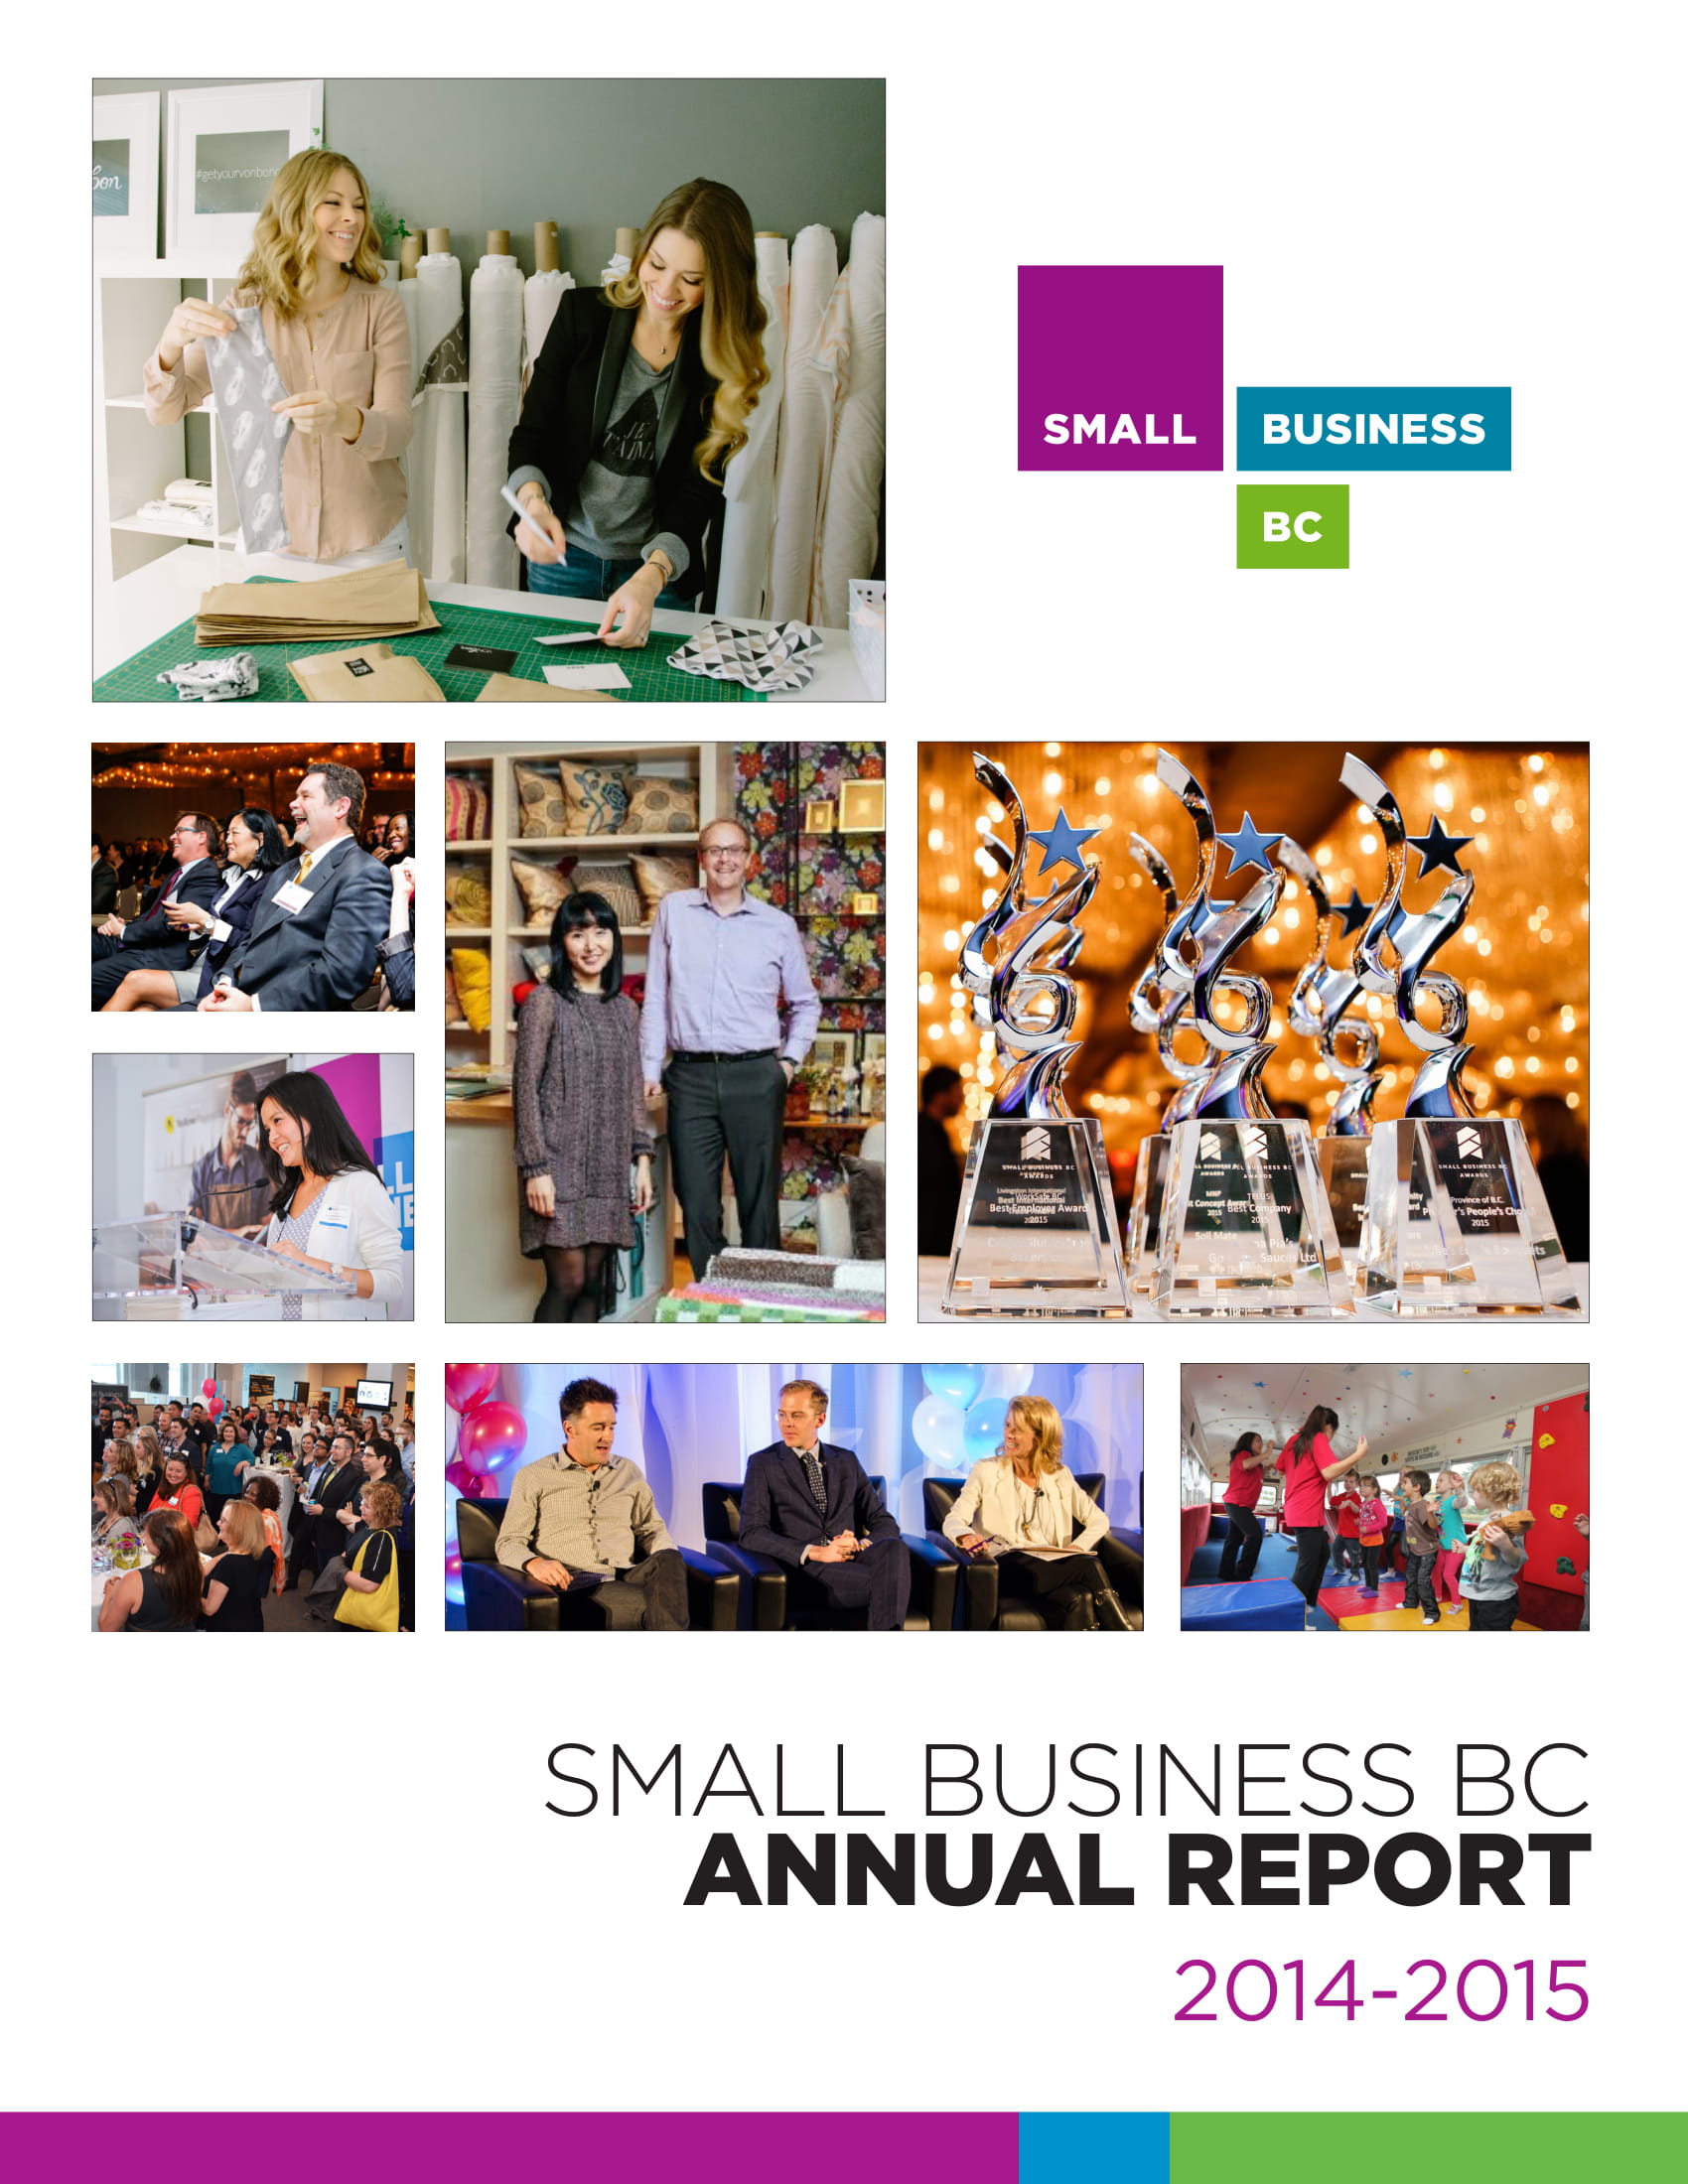 annual report of a small business example 1